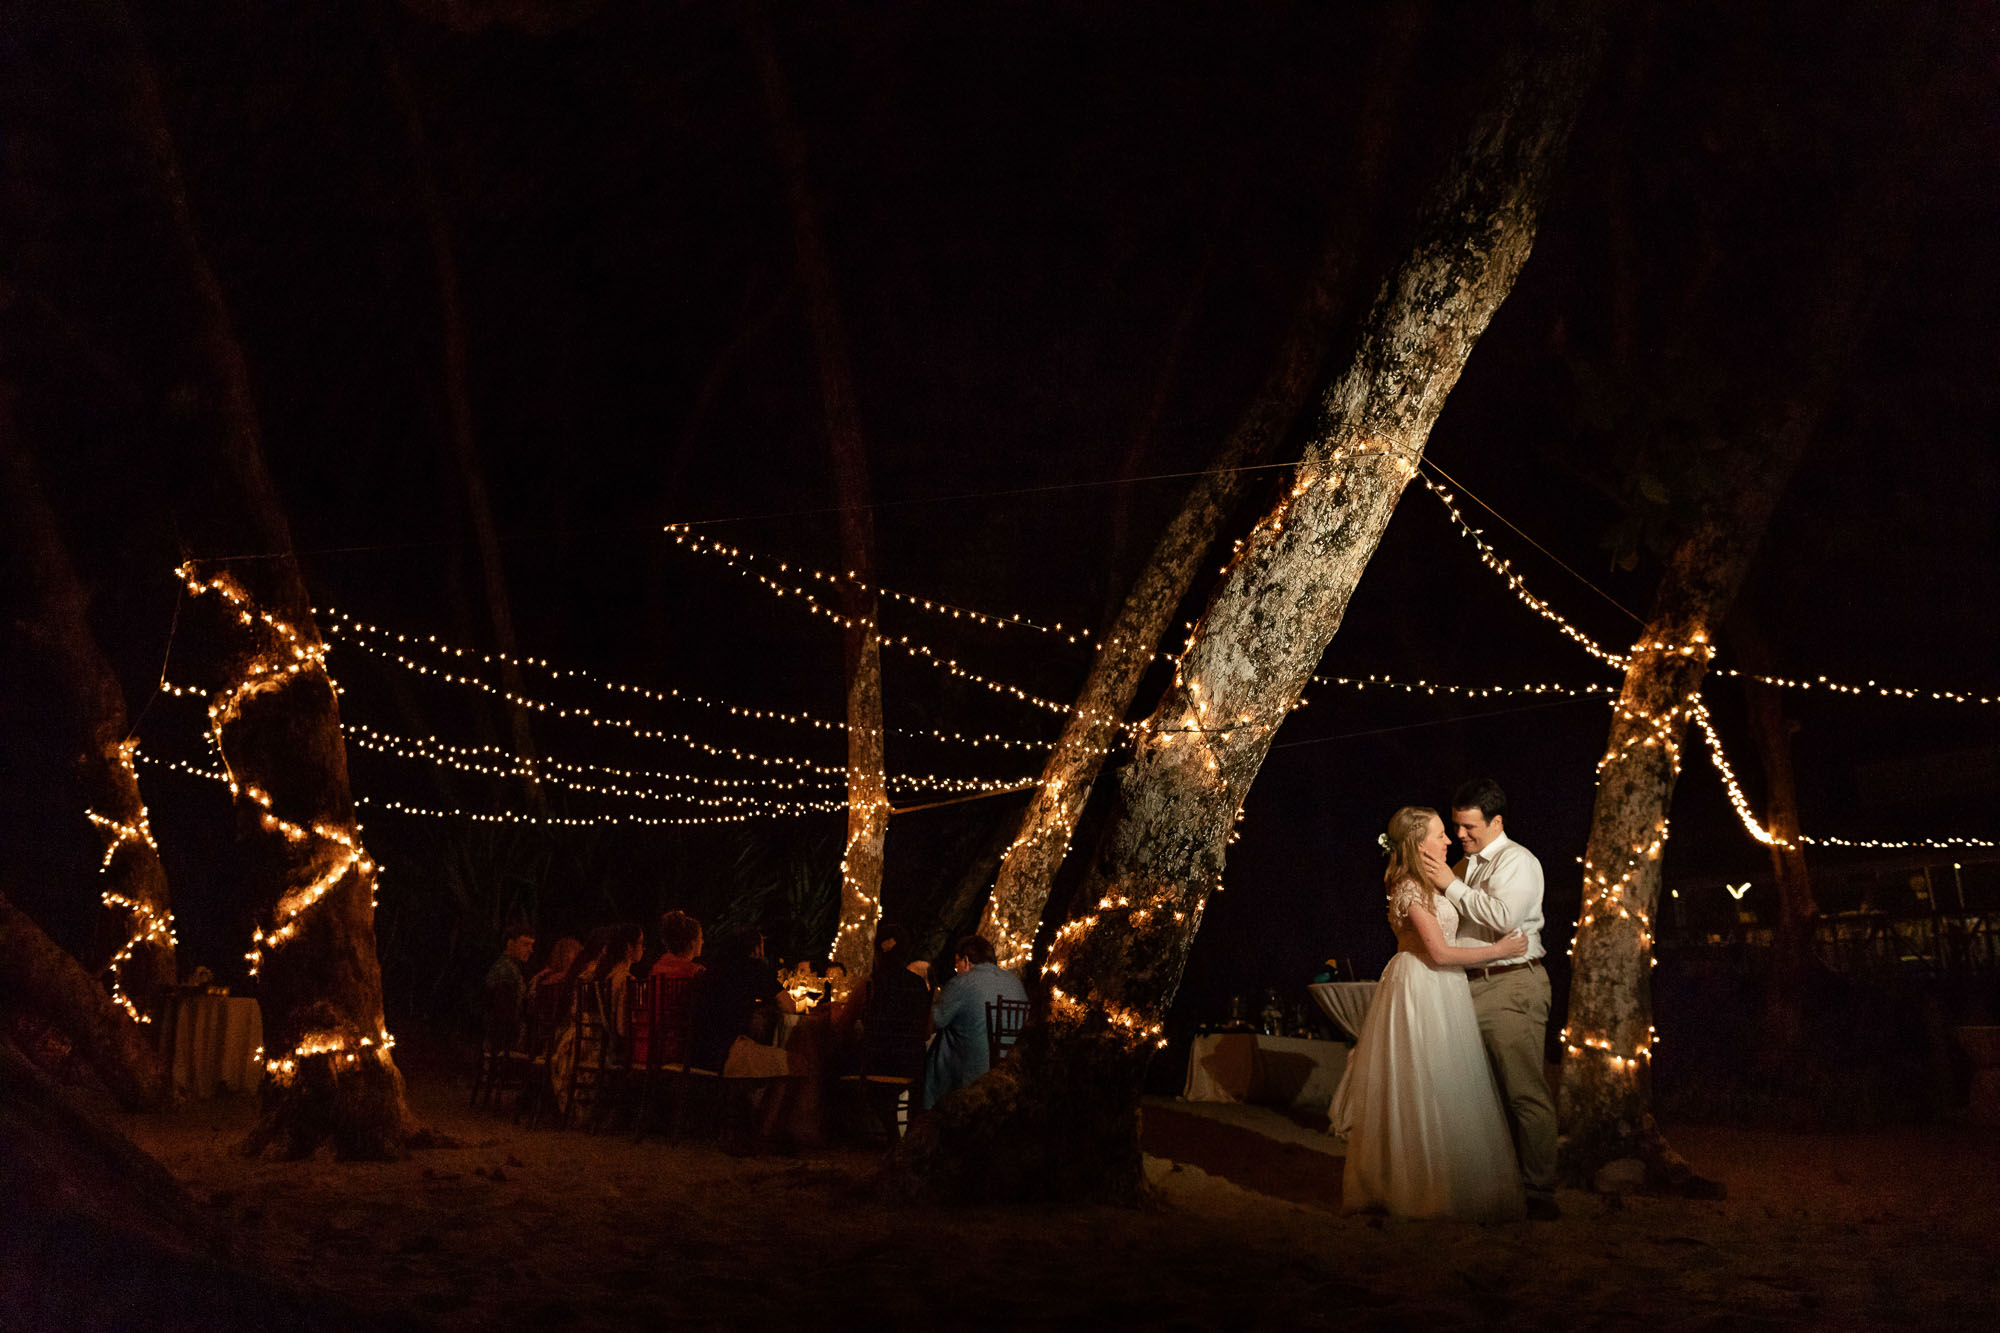 Creative wedding photography: spotlight on the couple surrounded by fairy lights